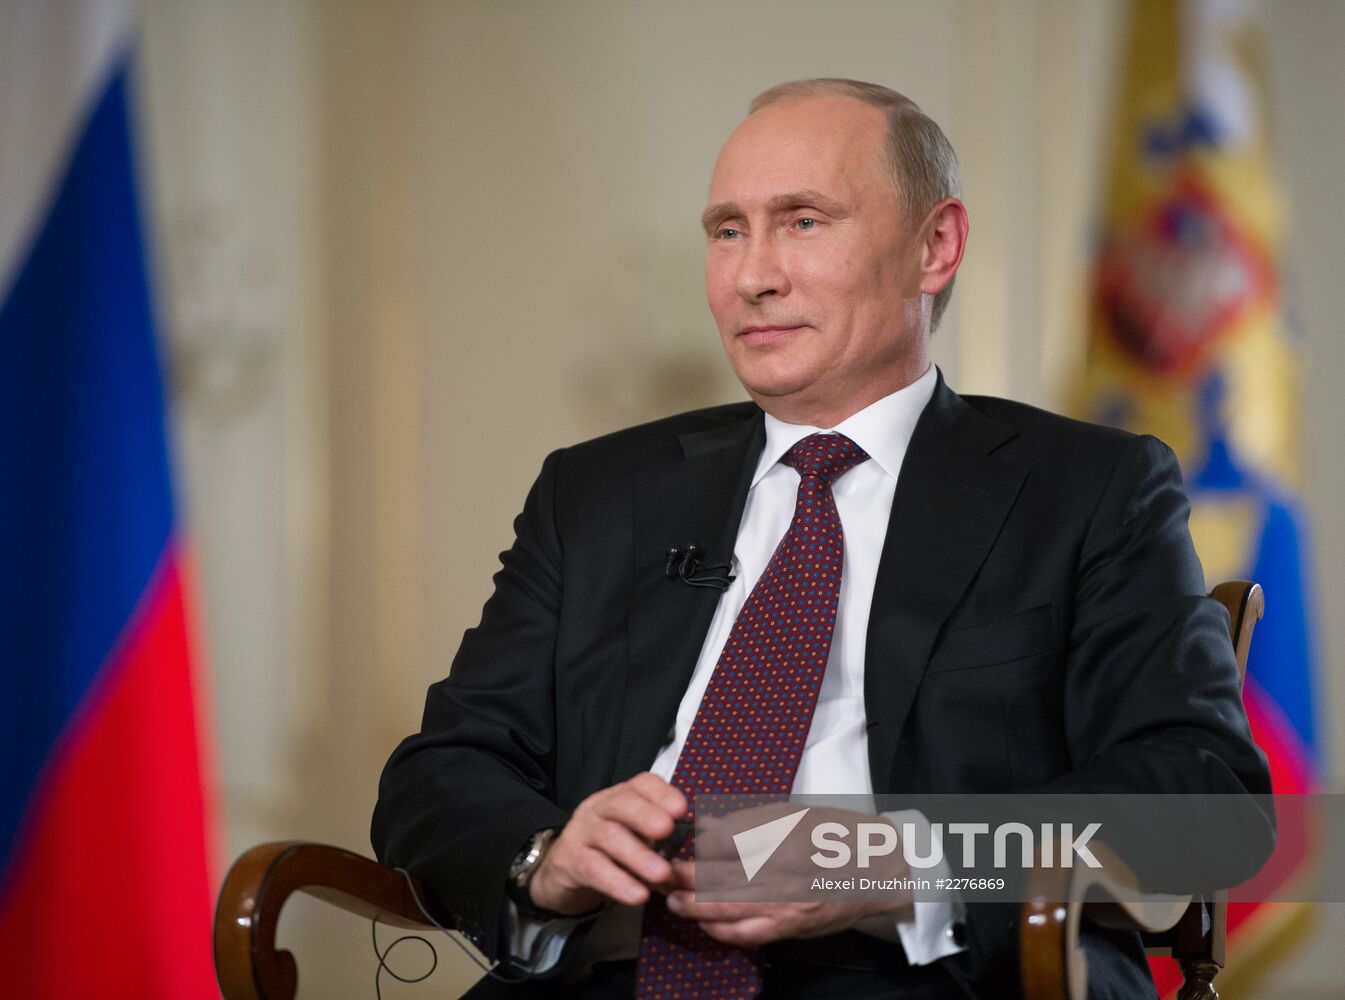 Vladimir Putin in interview with Channel 1 and Associated Press